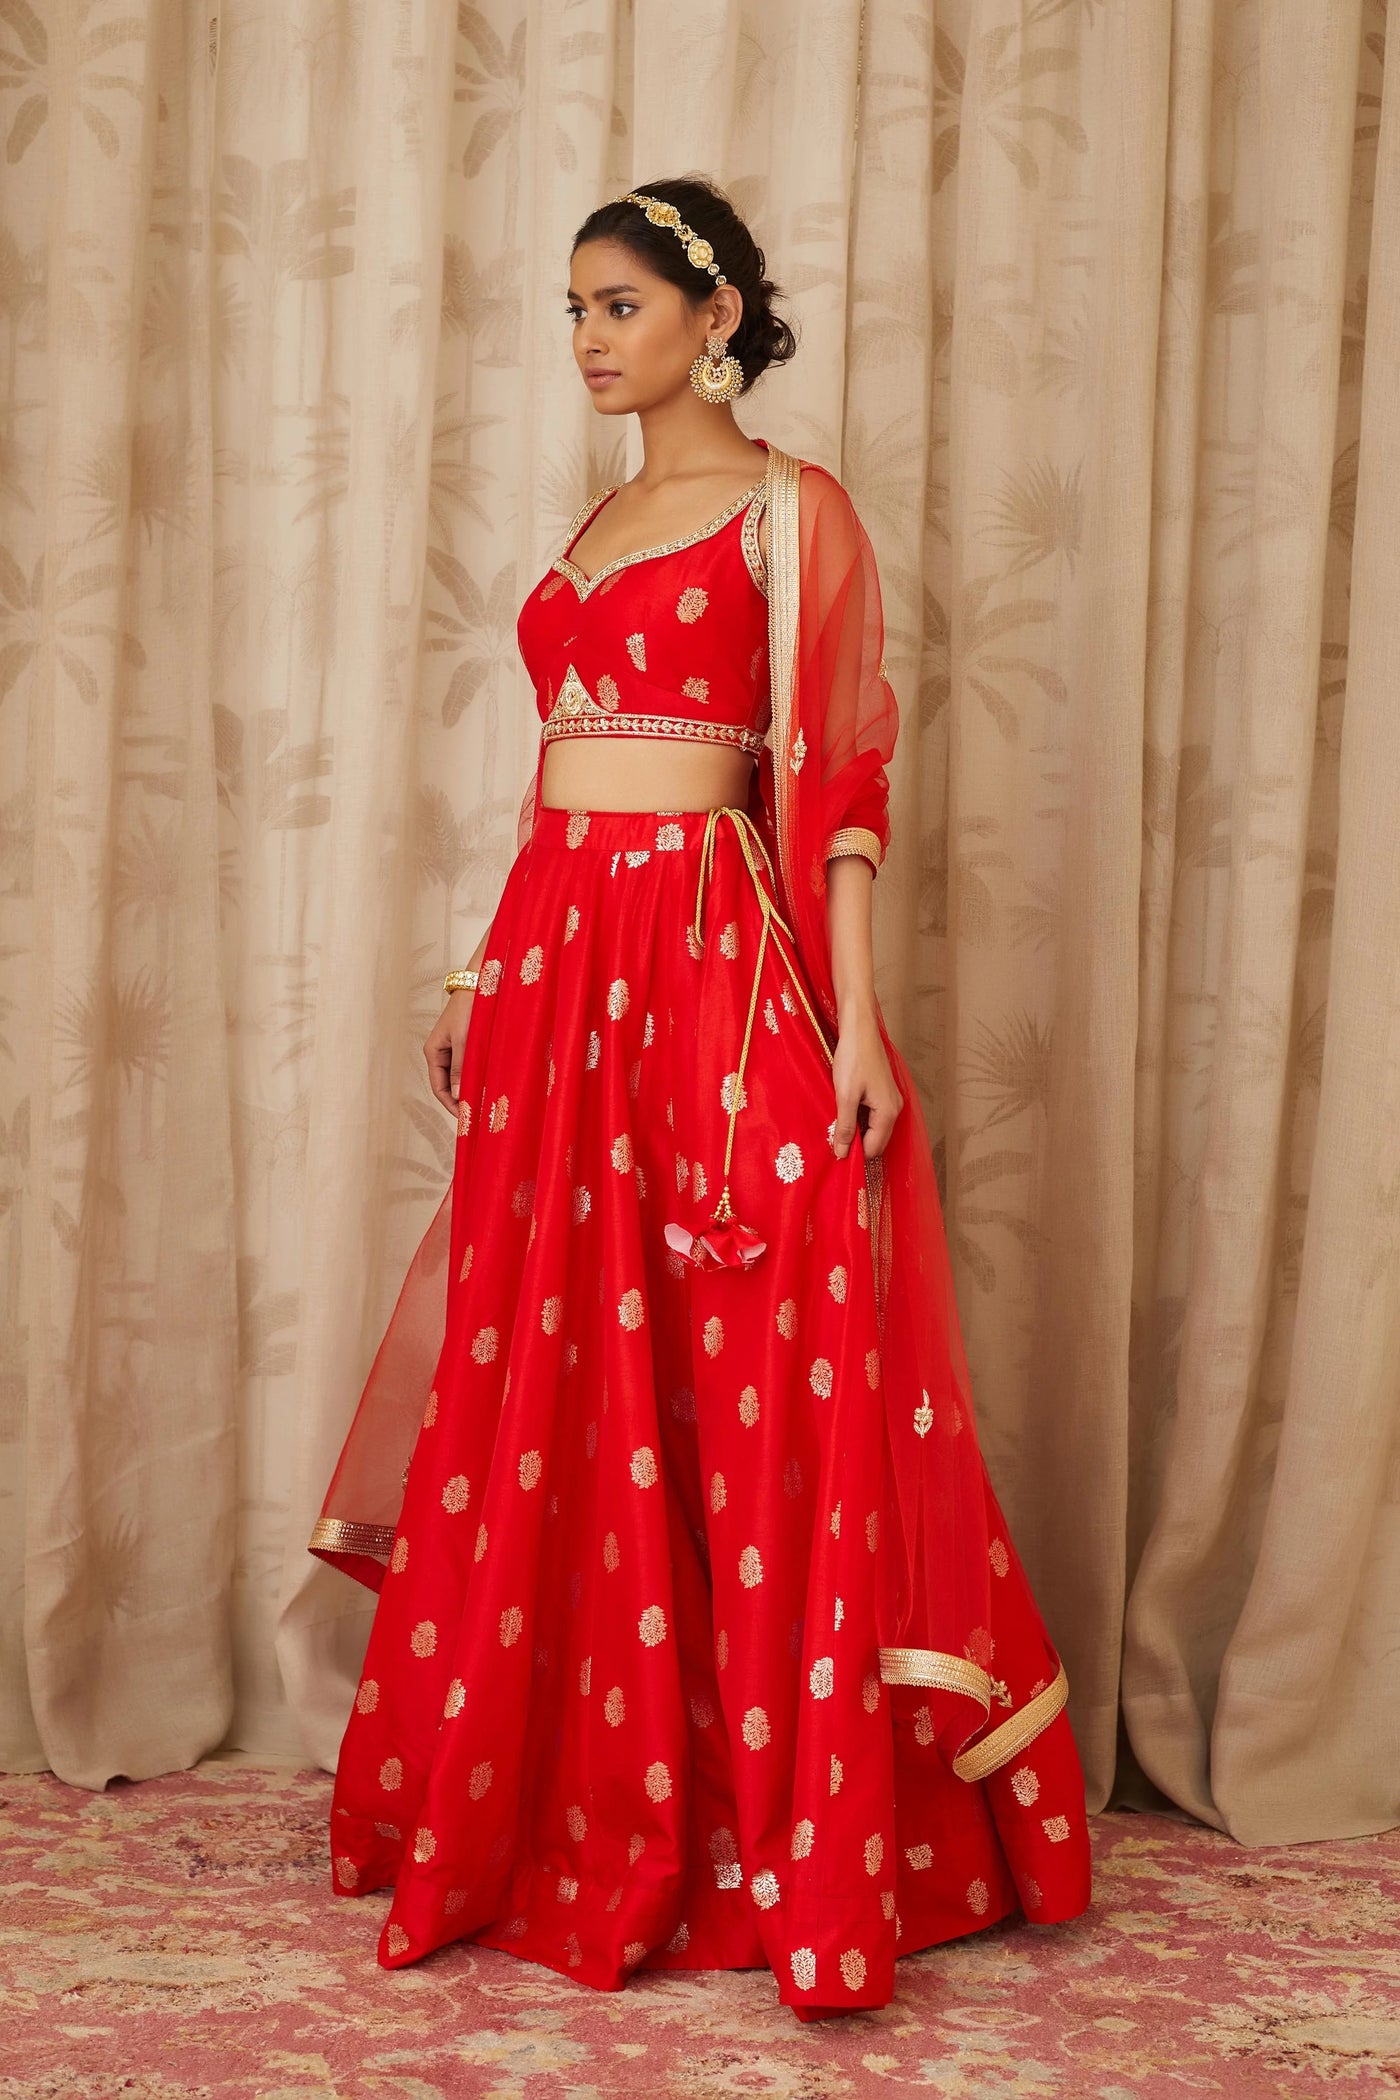 Red Zardosi Lehenga Set Indian Clothing in Denver, CO, Aurora, CO, Boulder, CO, Fort Collins, CO, Colorado Springs, CO, Parker, CO, Highlands Ranch, CO, Cherry Creek, CO, Centennial, CO, and Longmont, CO. NATIONWIDE SHIPPING USA- India Fashion X